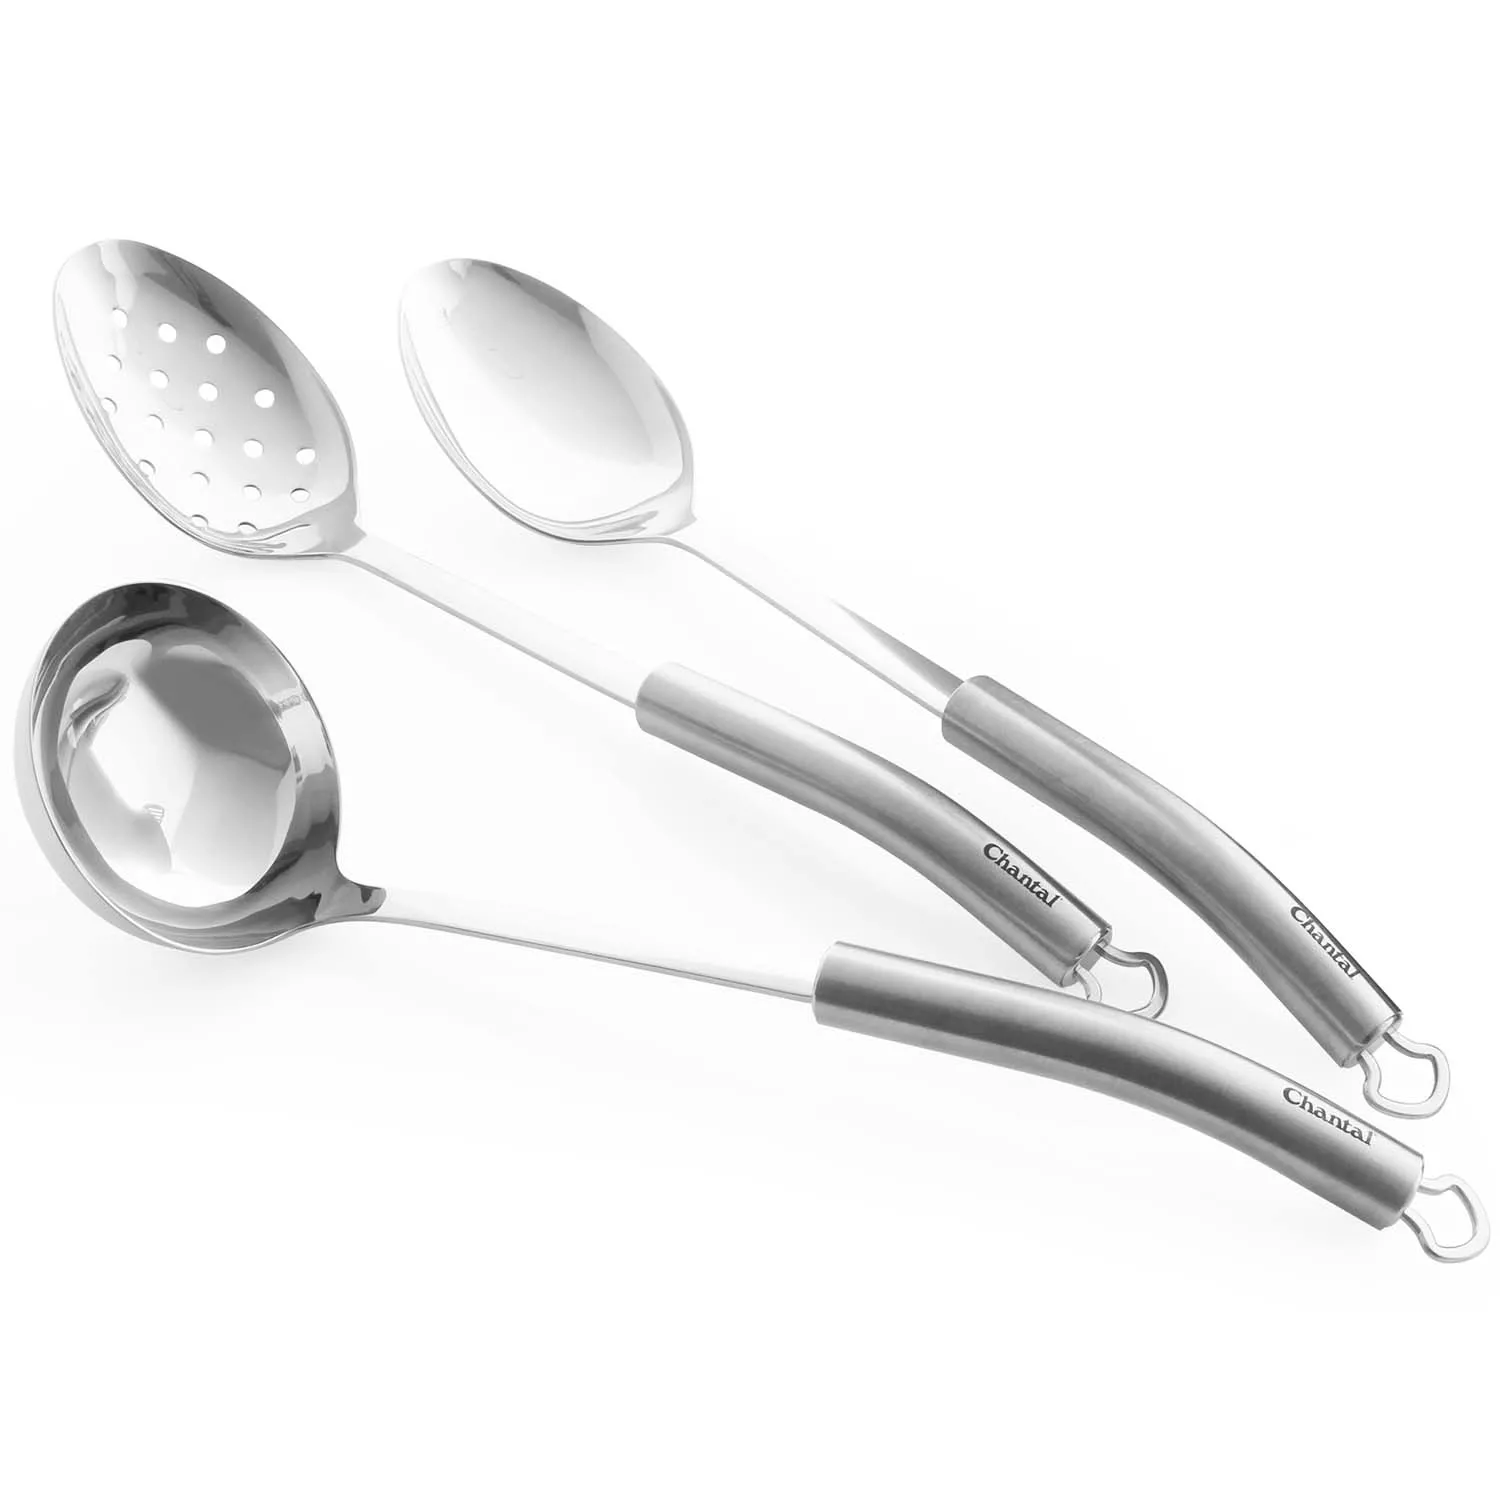 OXO Stainless Steel Silicon Handle Pasta Ladle Spoon Set 4